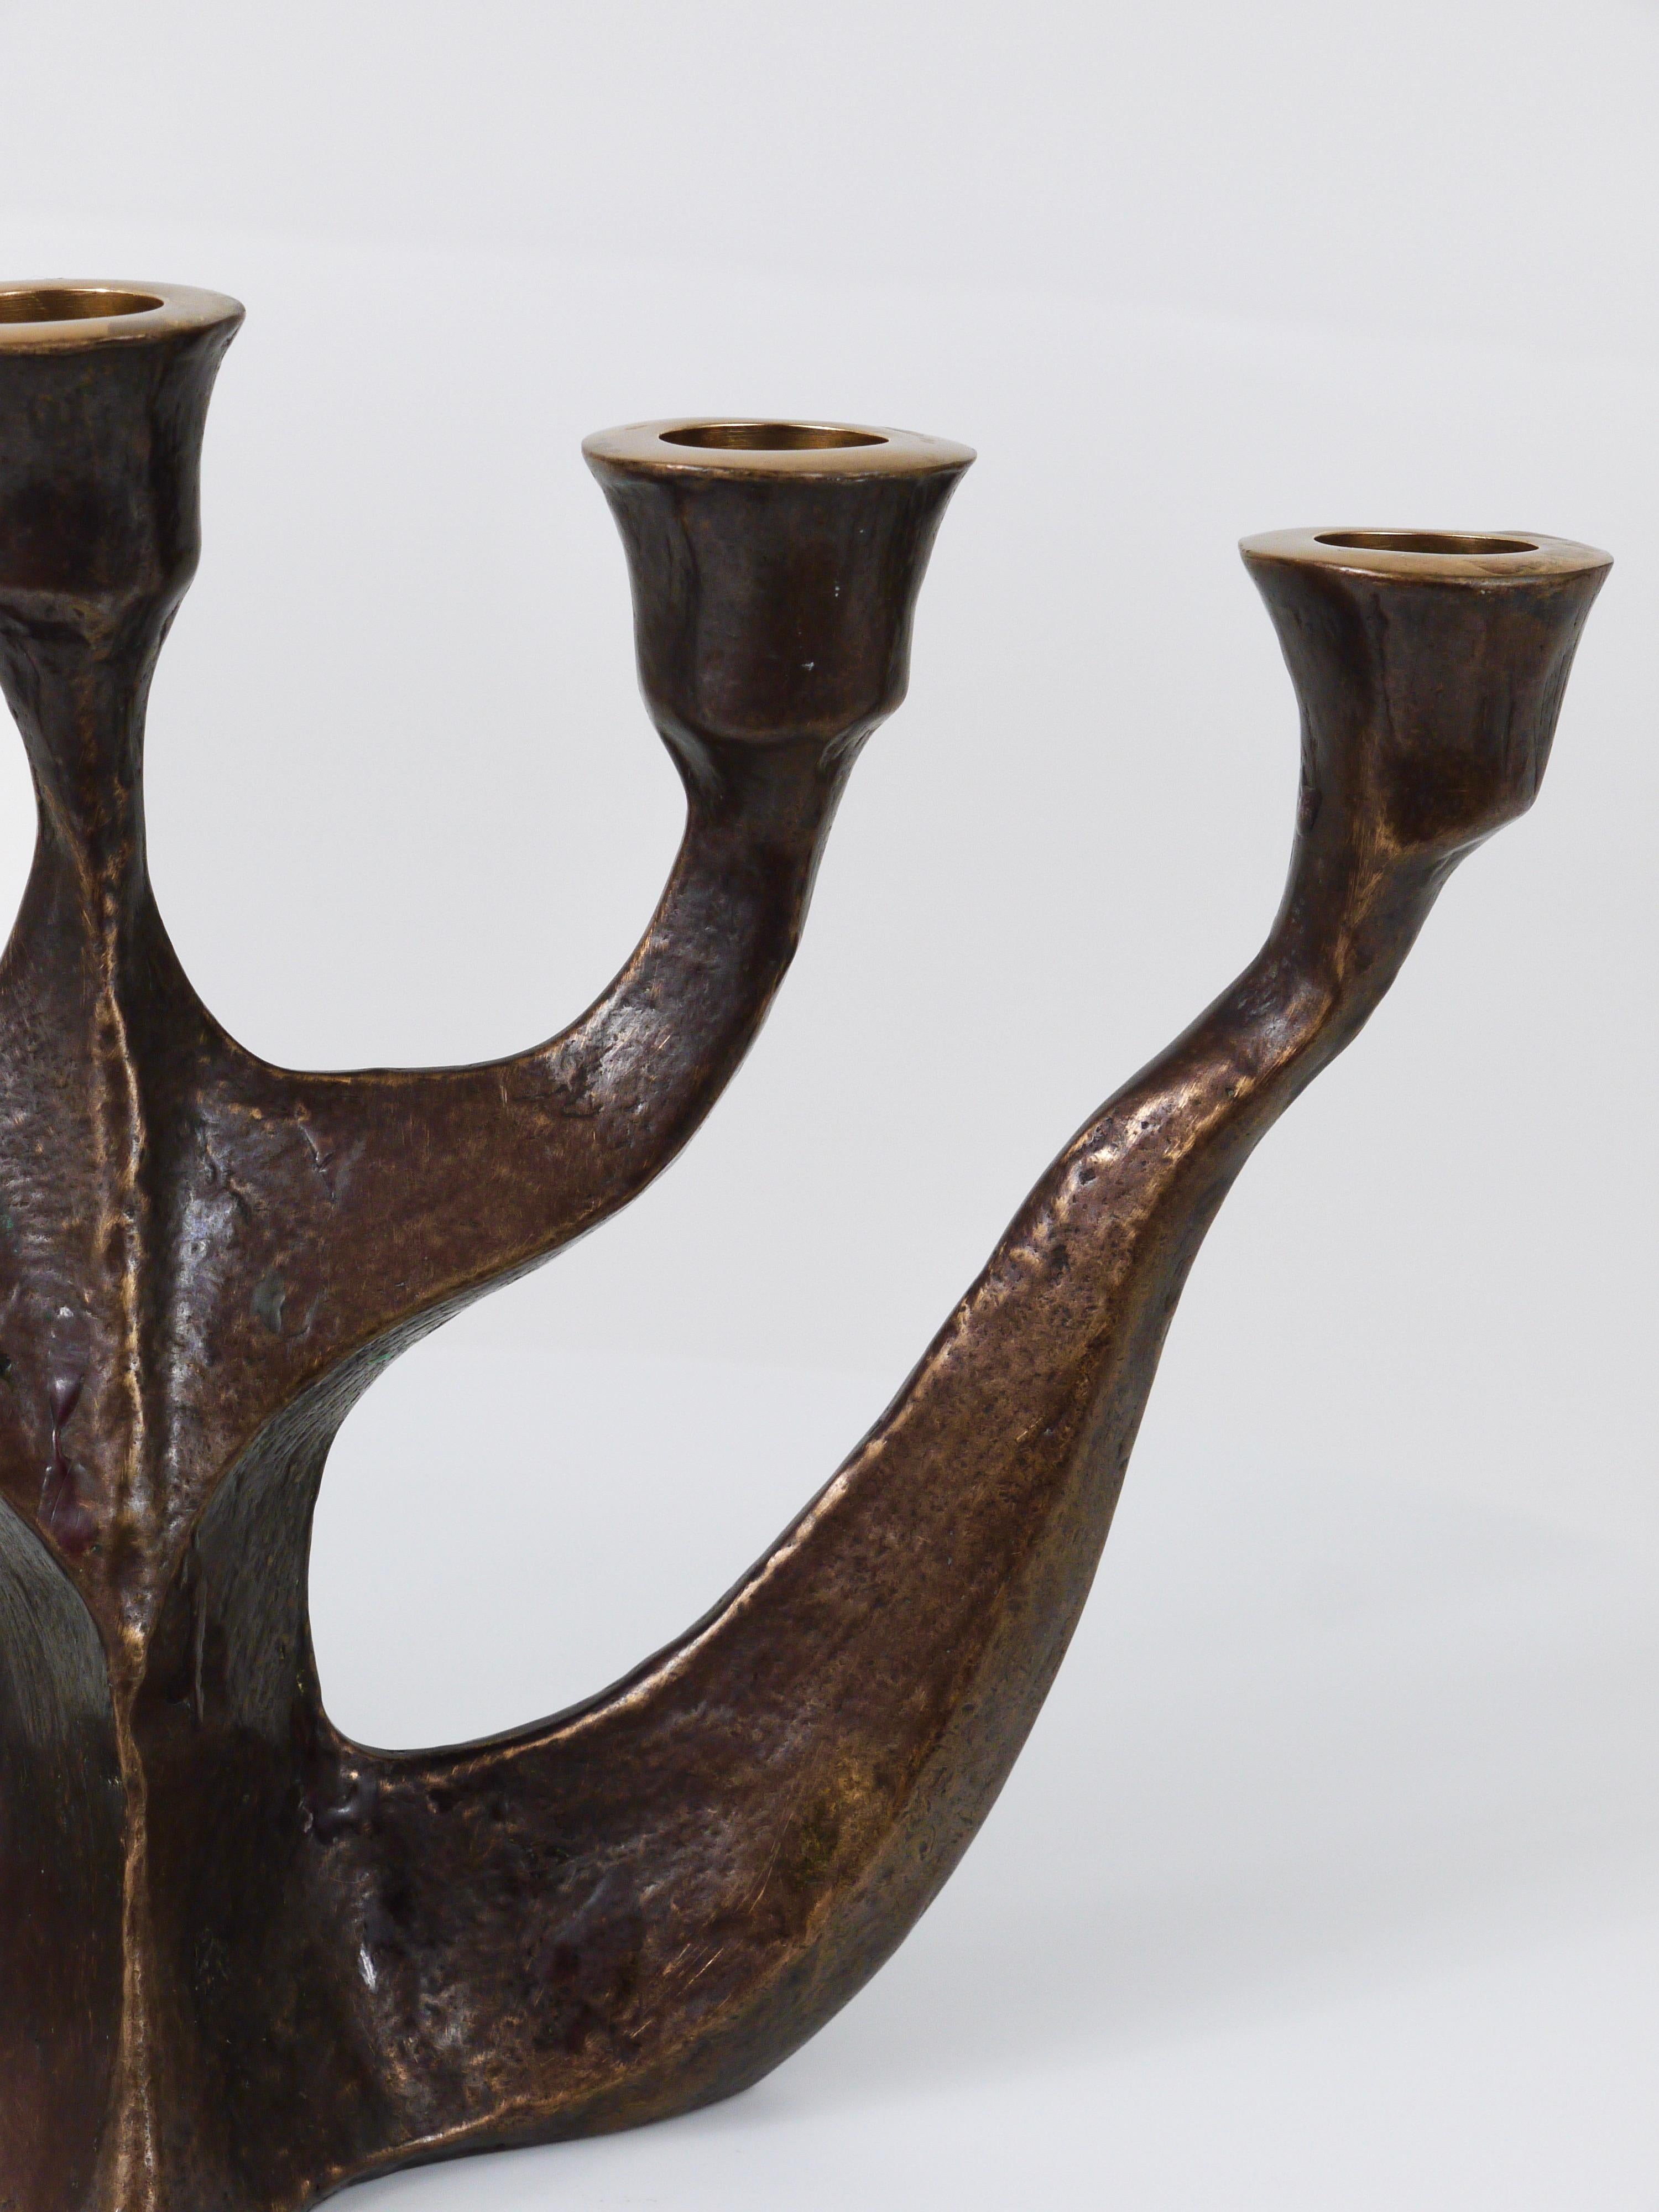 Up to Two Midcentury Brutalist Bronze Candleholders by Michael Harjes, 1960s For Sale 12